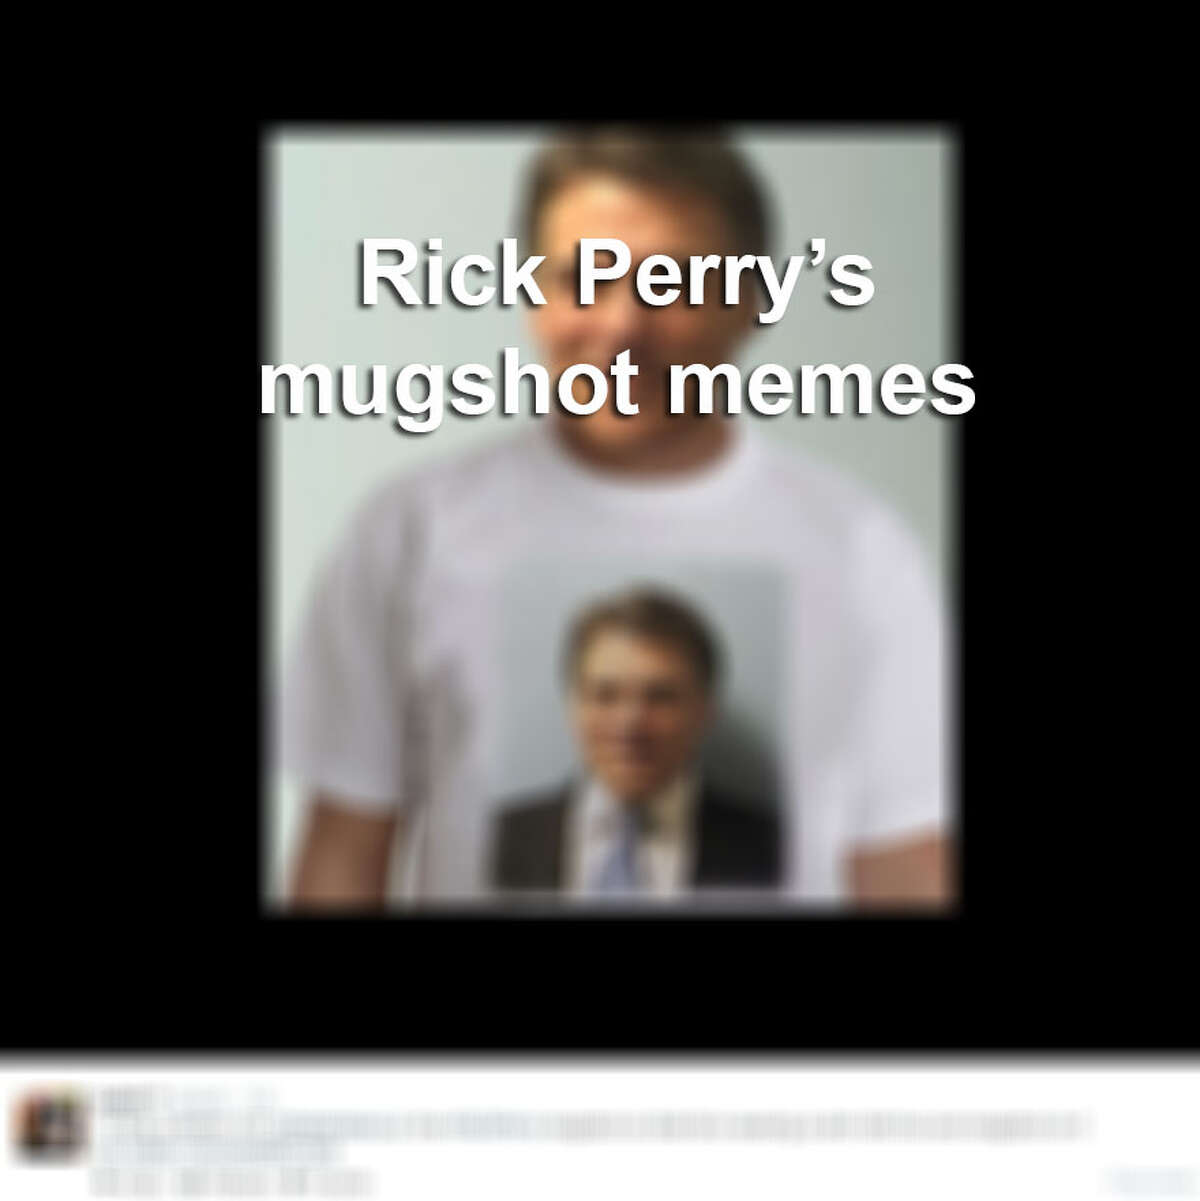 Gov. Rick Perry's mugshot made the rounds on the internet after he was booked on two felony charges in the Travis County Jail on August 15, 2014. We've compiled some of the memes from Perry's mugshot, click ahead to see the best of the best.